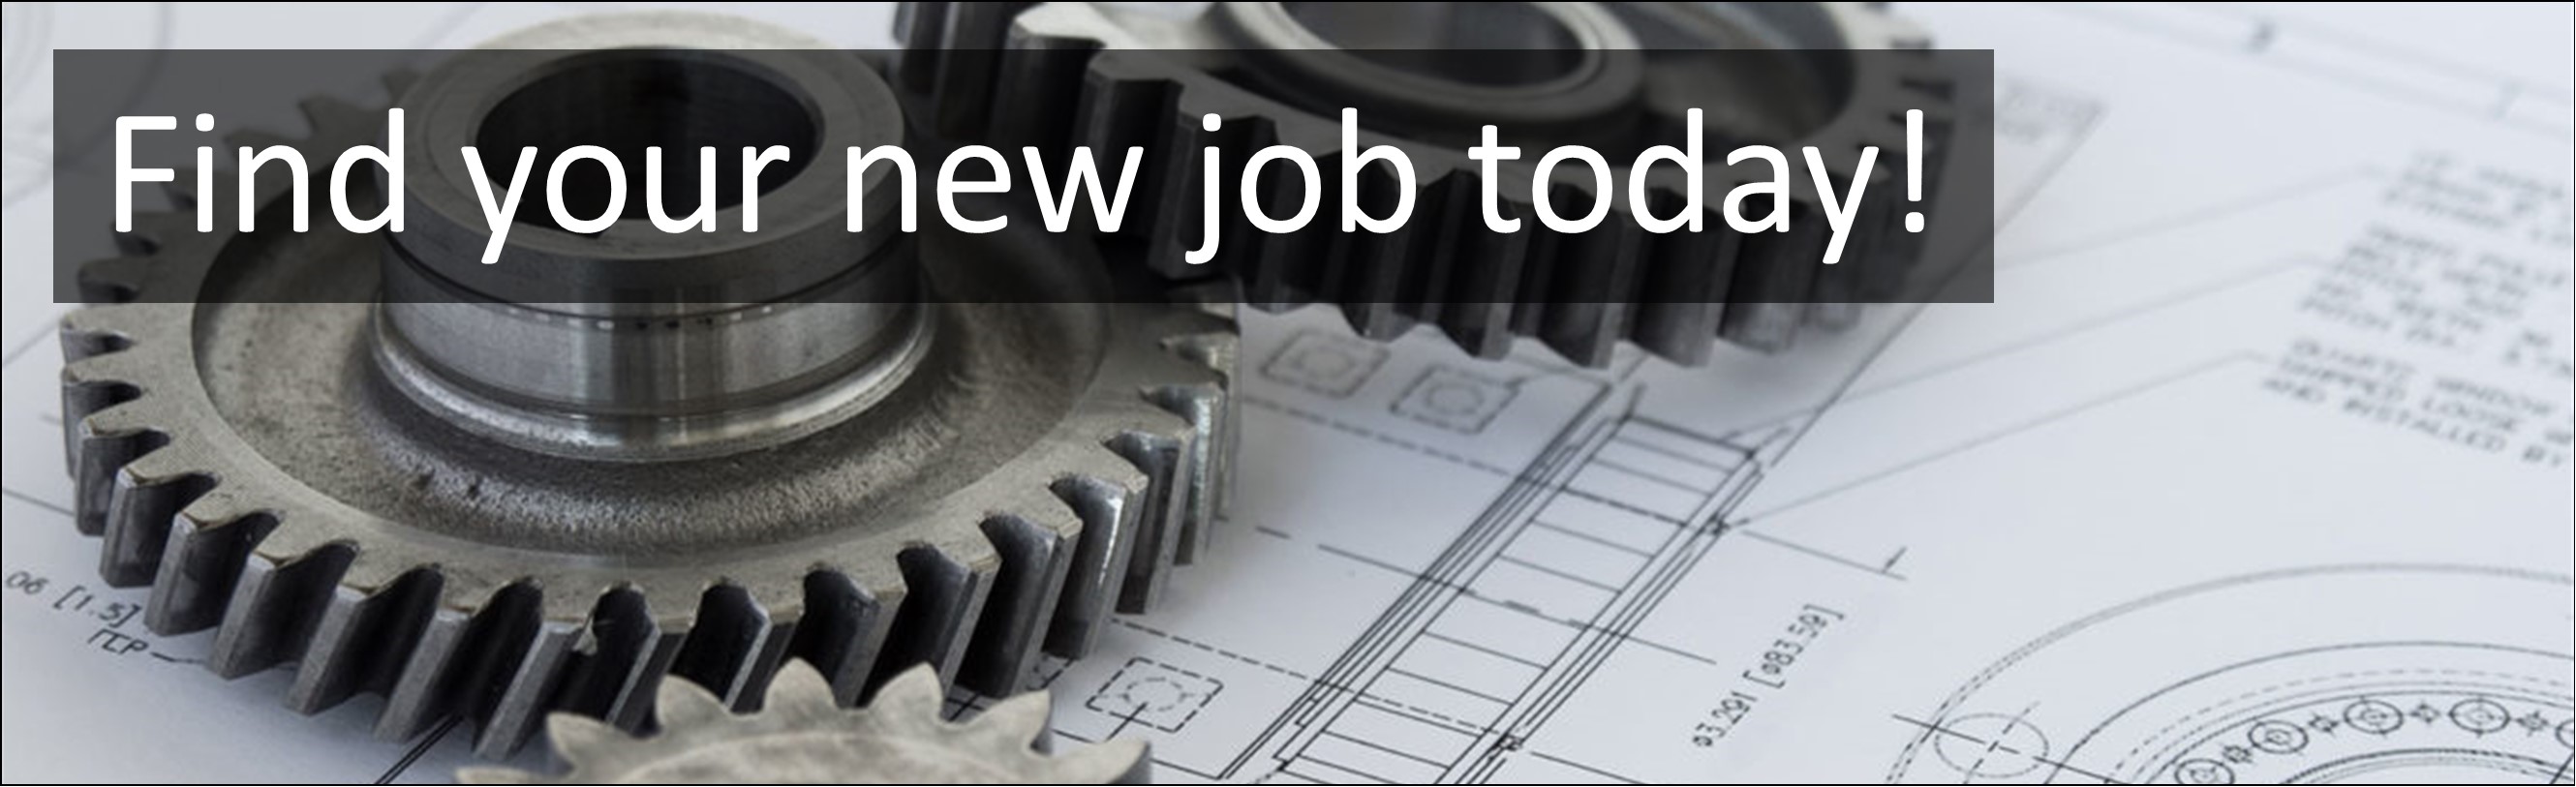 Engineering Jobs. HVAC & Refrigeration Maintenance Engineer
Jobs, Careers & Vacancies in Exeter, Devon, South West England Advertised by AWD online – Multi-Job Board Advertising and CV Sourcing Recruitment Services